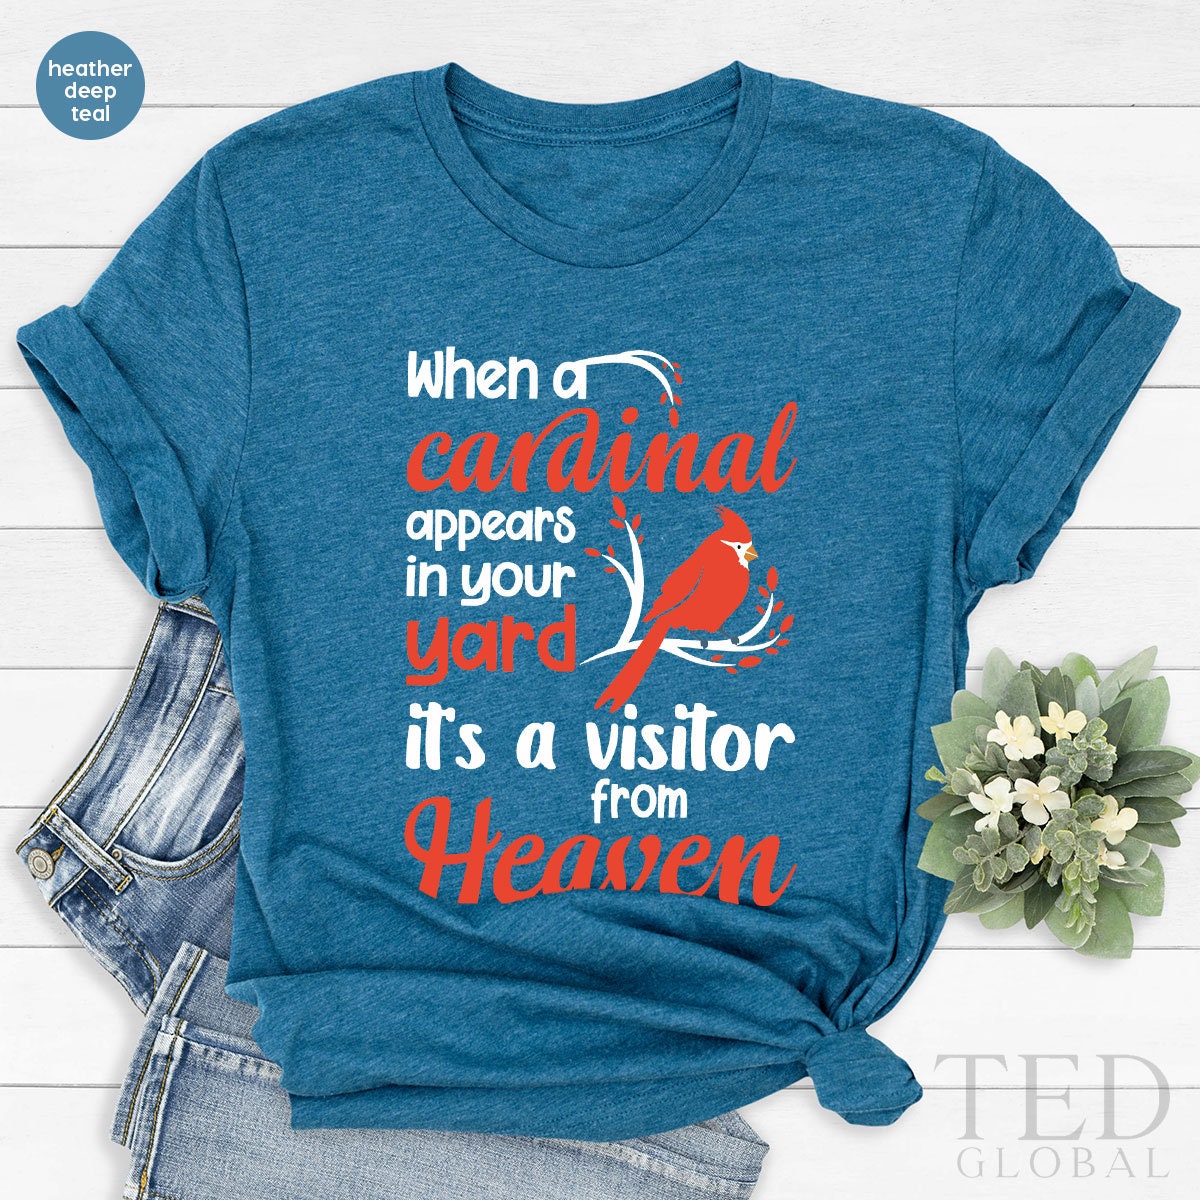 Cute Bird T-Shirt, When A Cardinal Appears In Your Yard Its A Visitor From HeavenT Shirt, Family Holiday Outfit Shirts, Christmas Gift - Fastdeliverytees.com